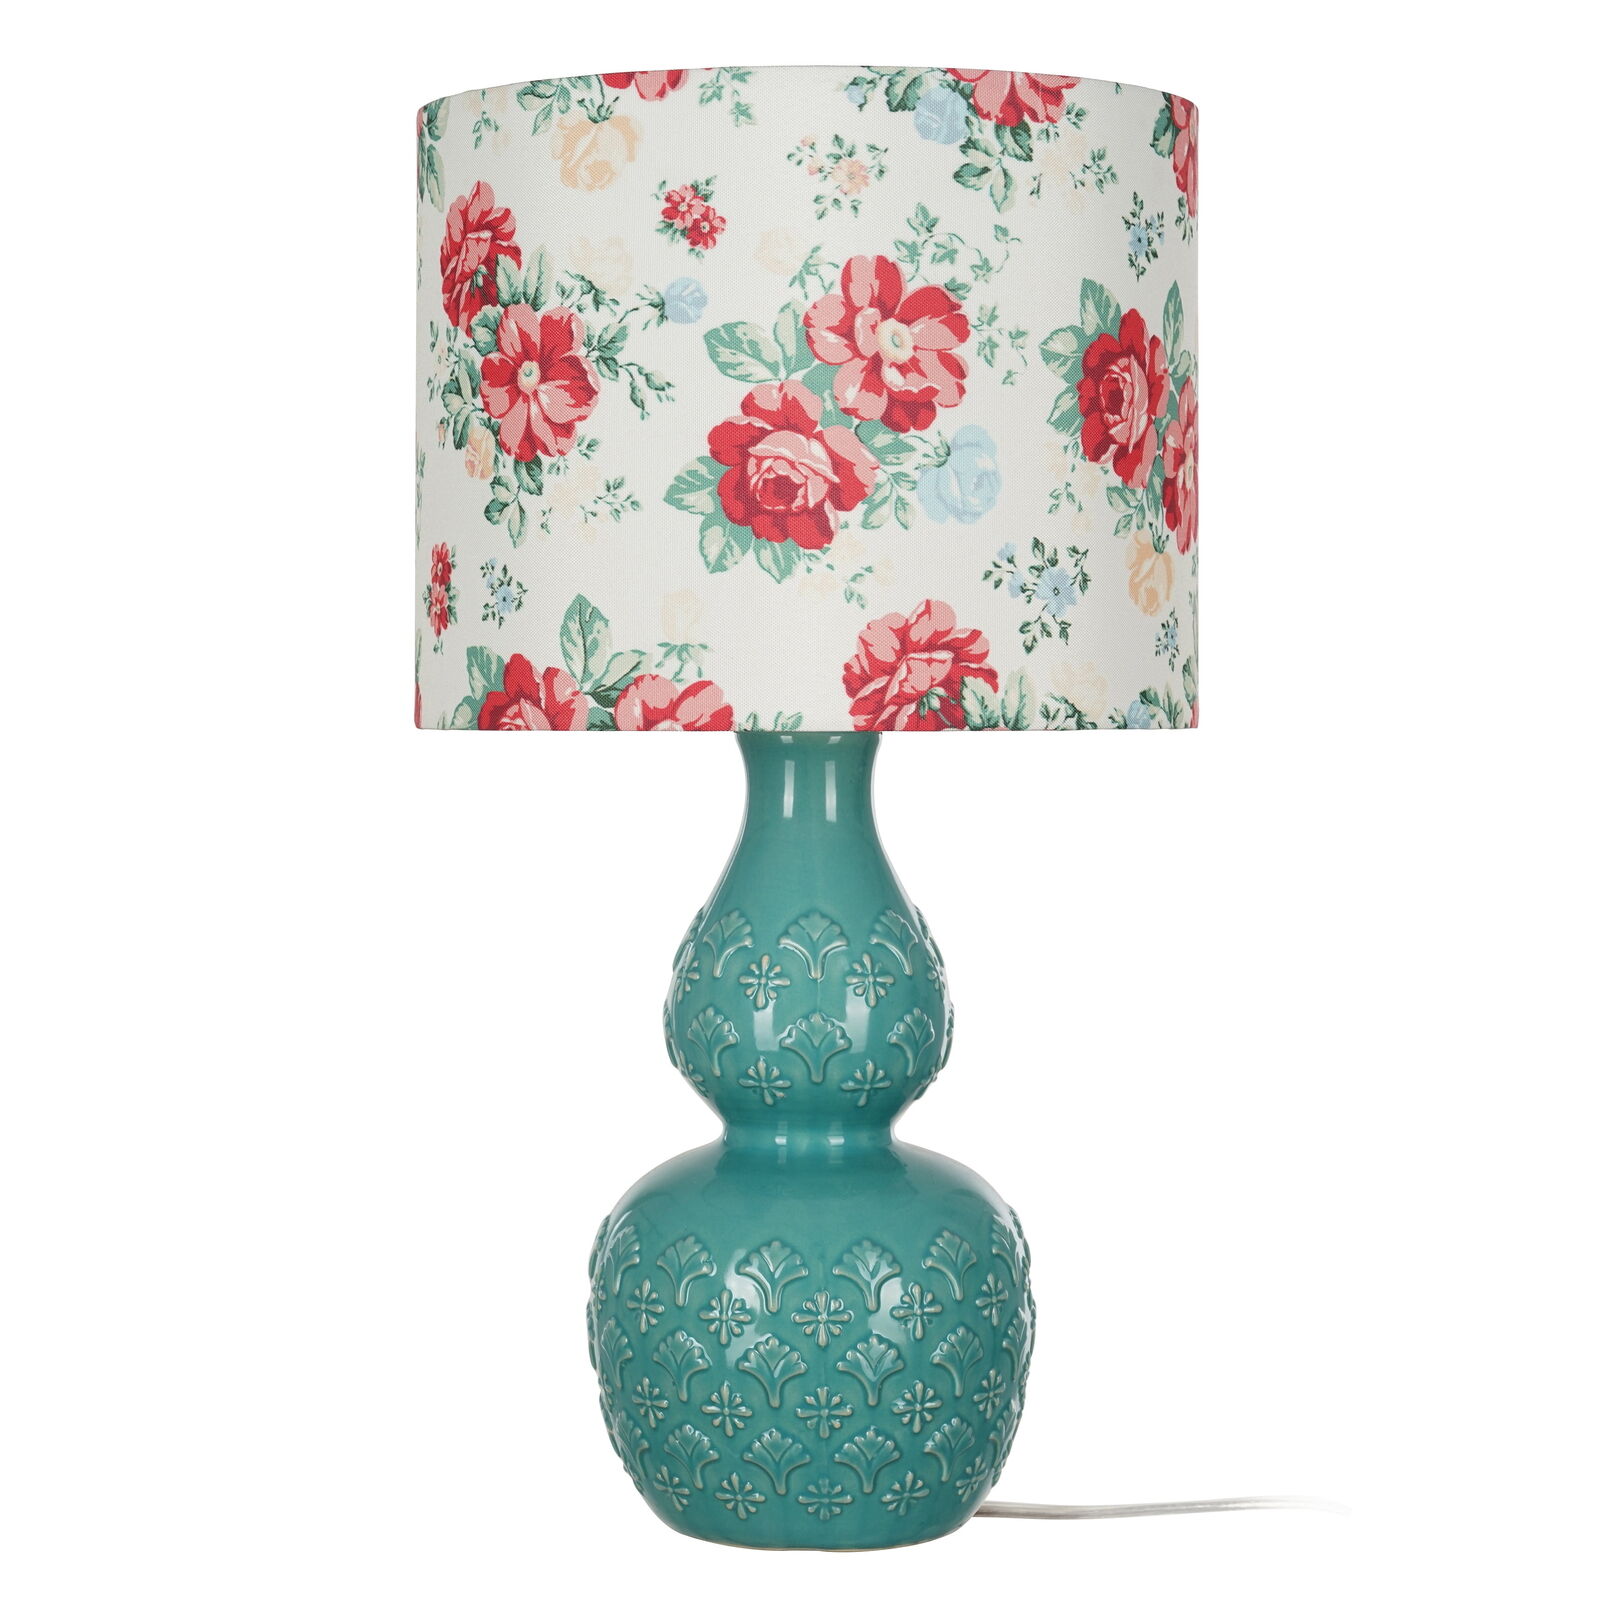 Vintage Floral Table Lamp Green Finish